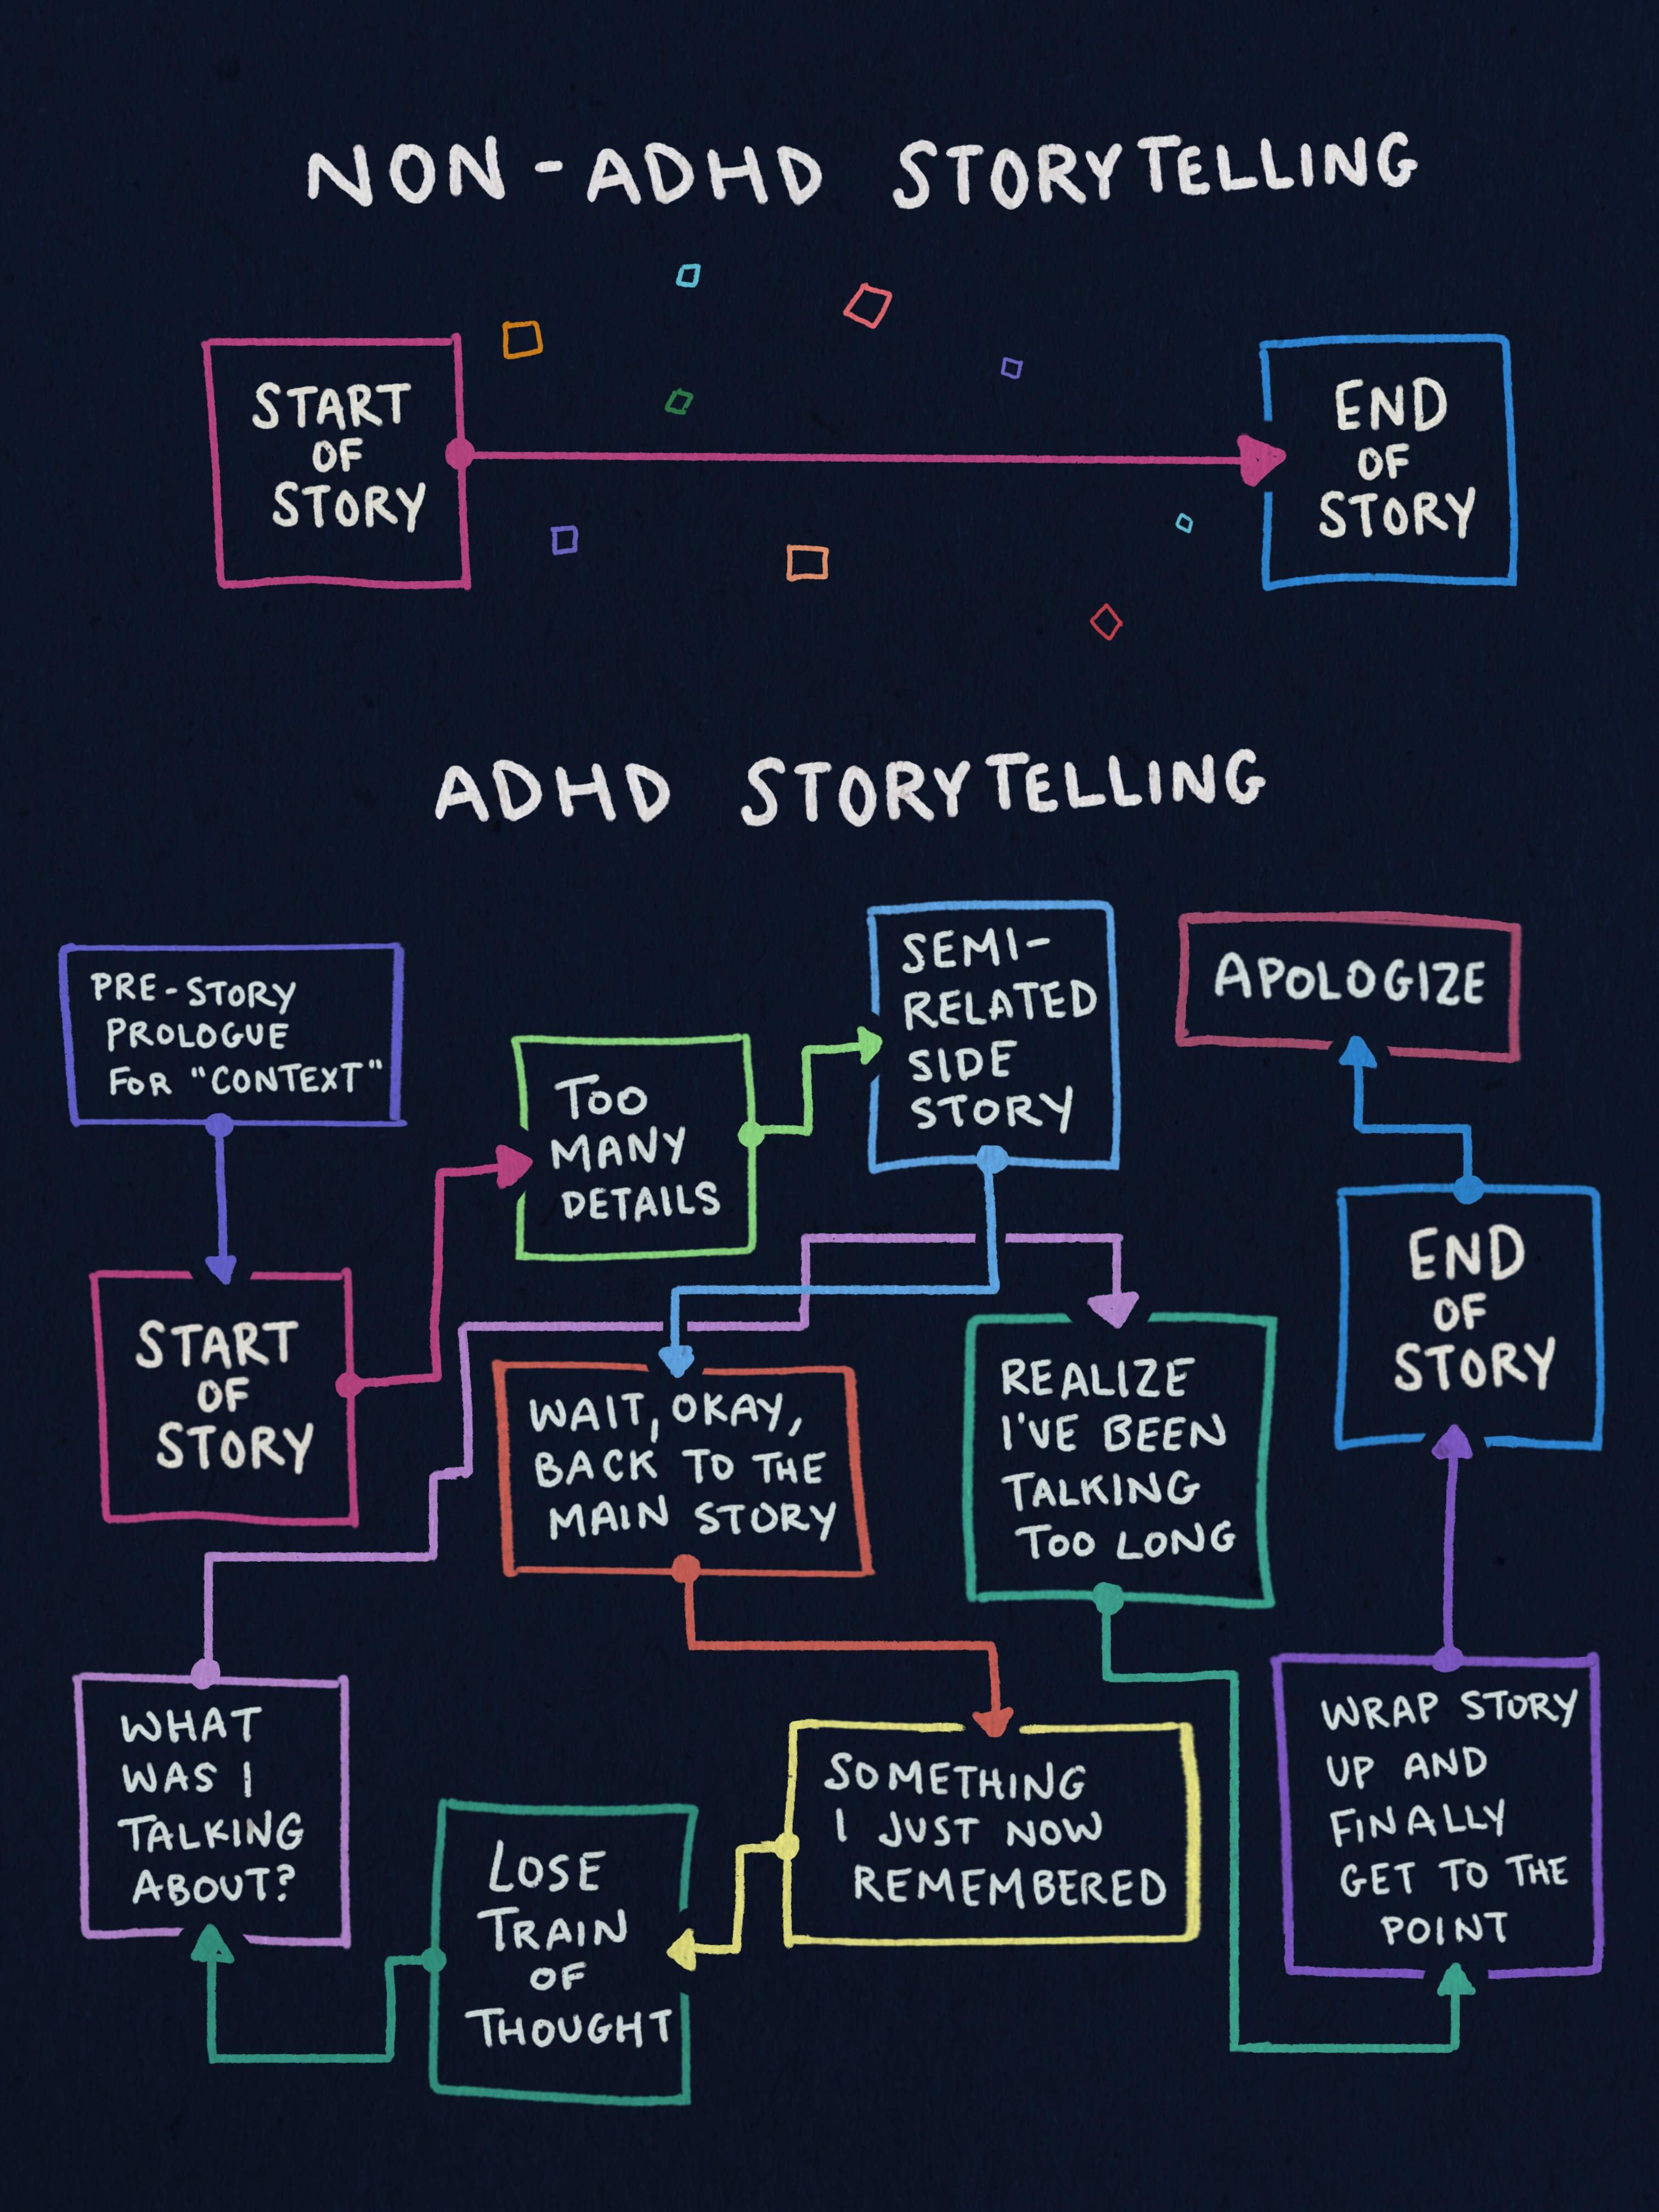 A flowchart comparing the storytelling styles of someone without ADHD to someone with ADHD